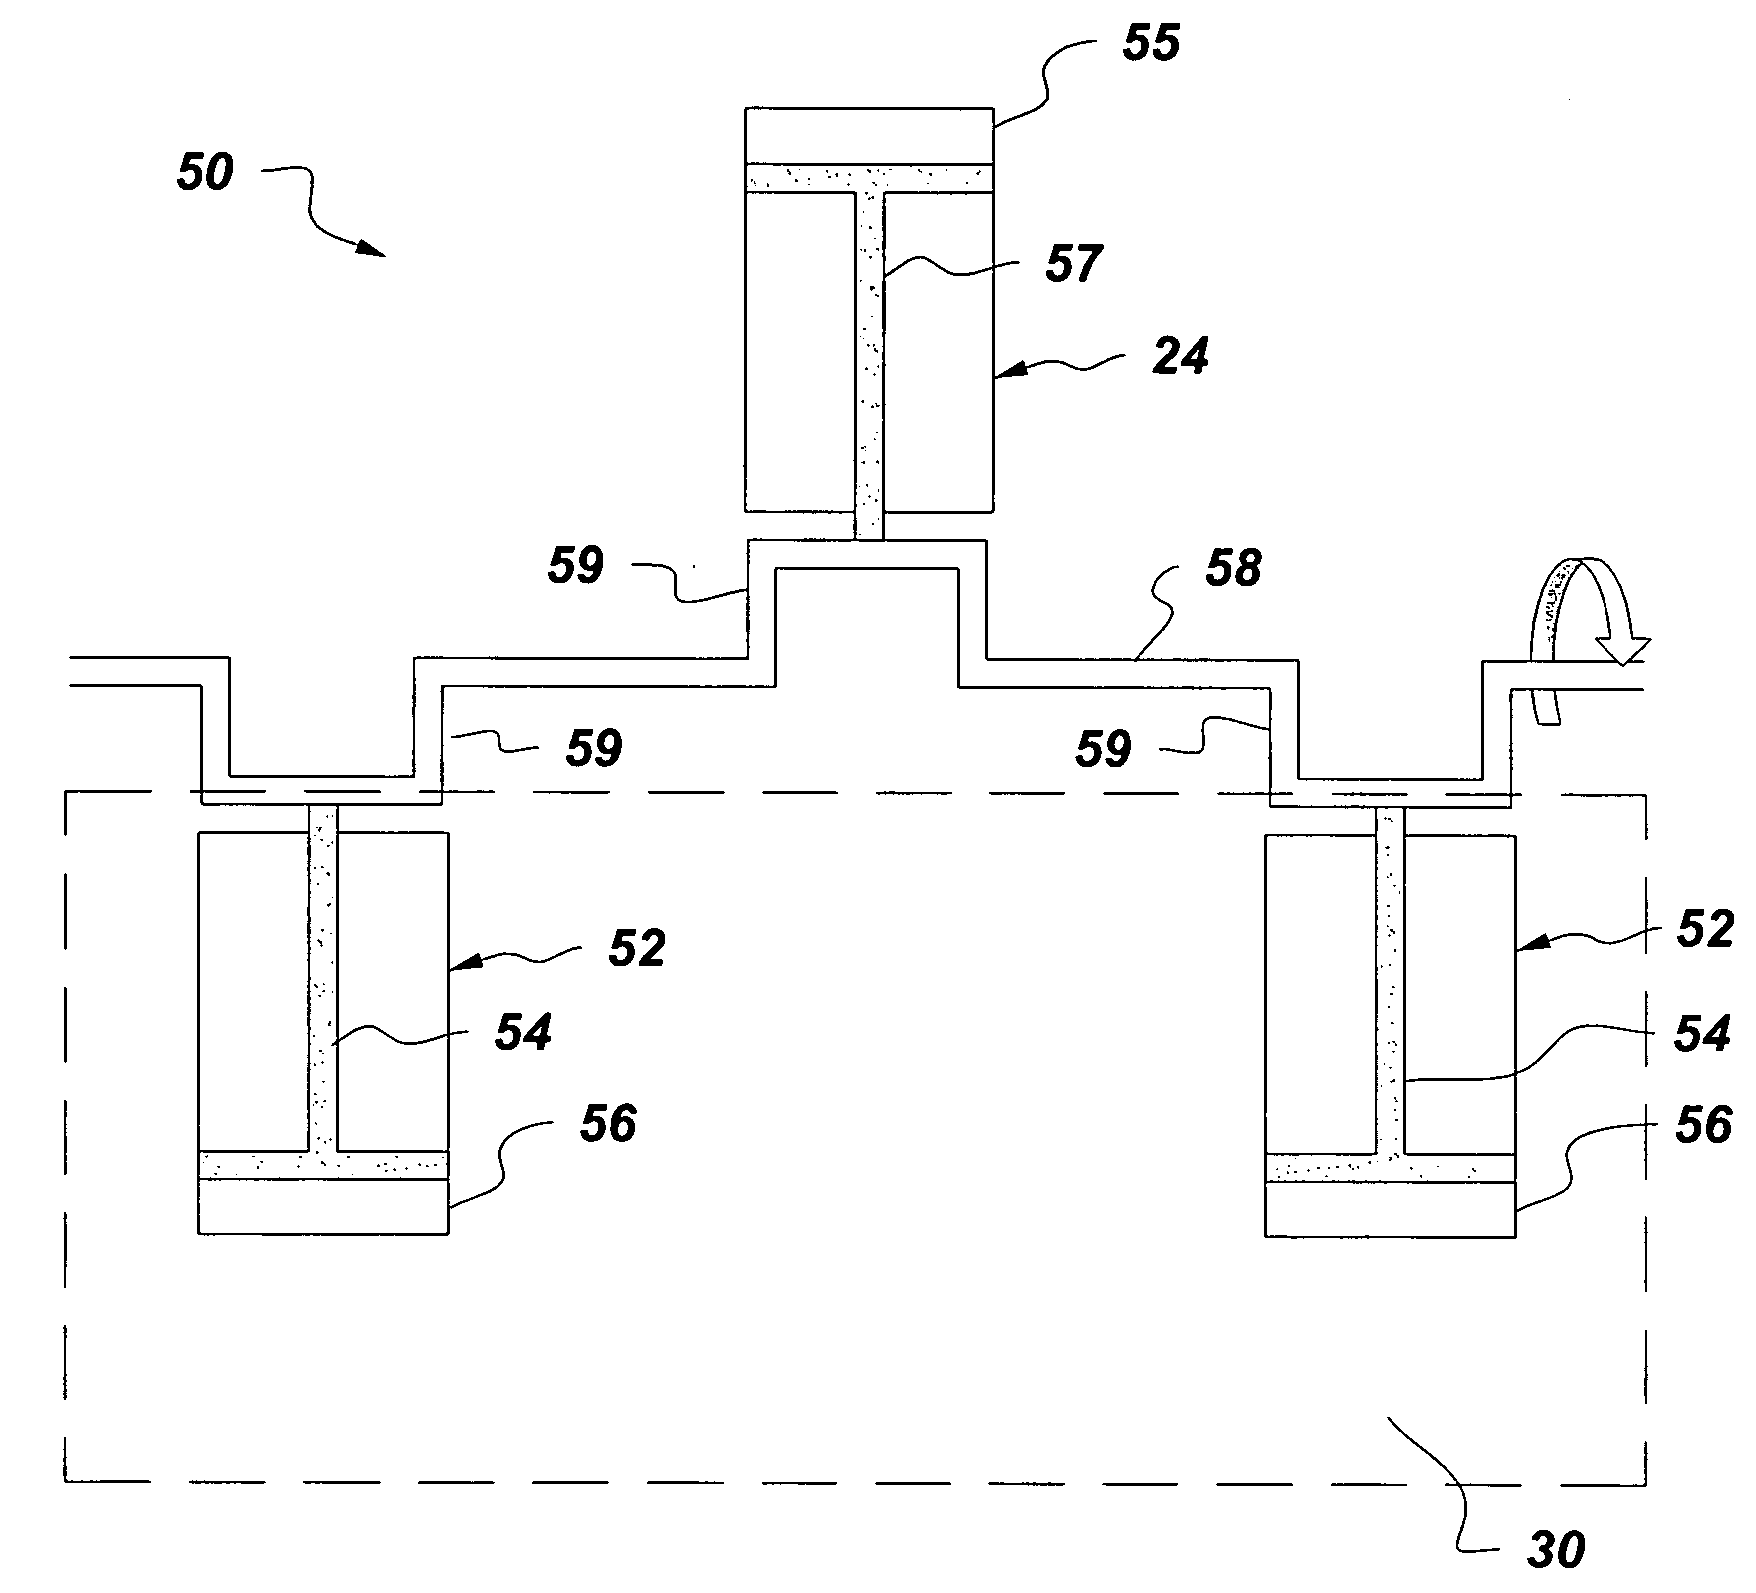 System and method for reducing emission from a combustion engine